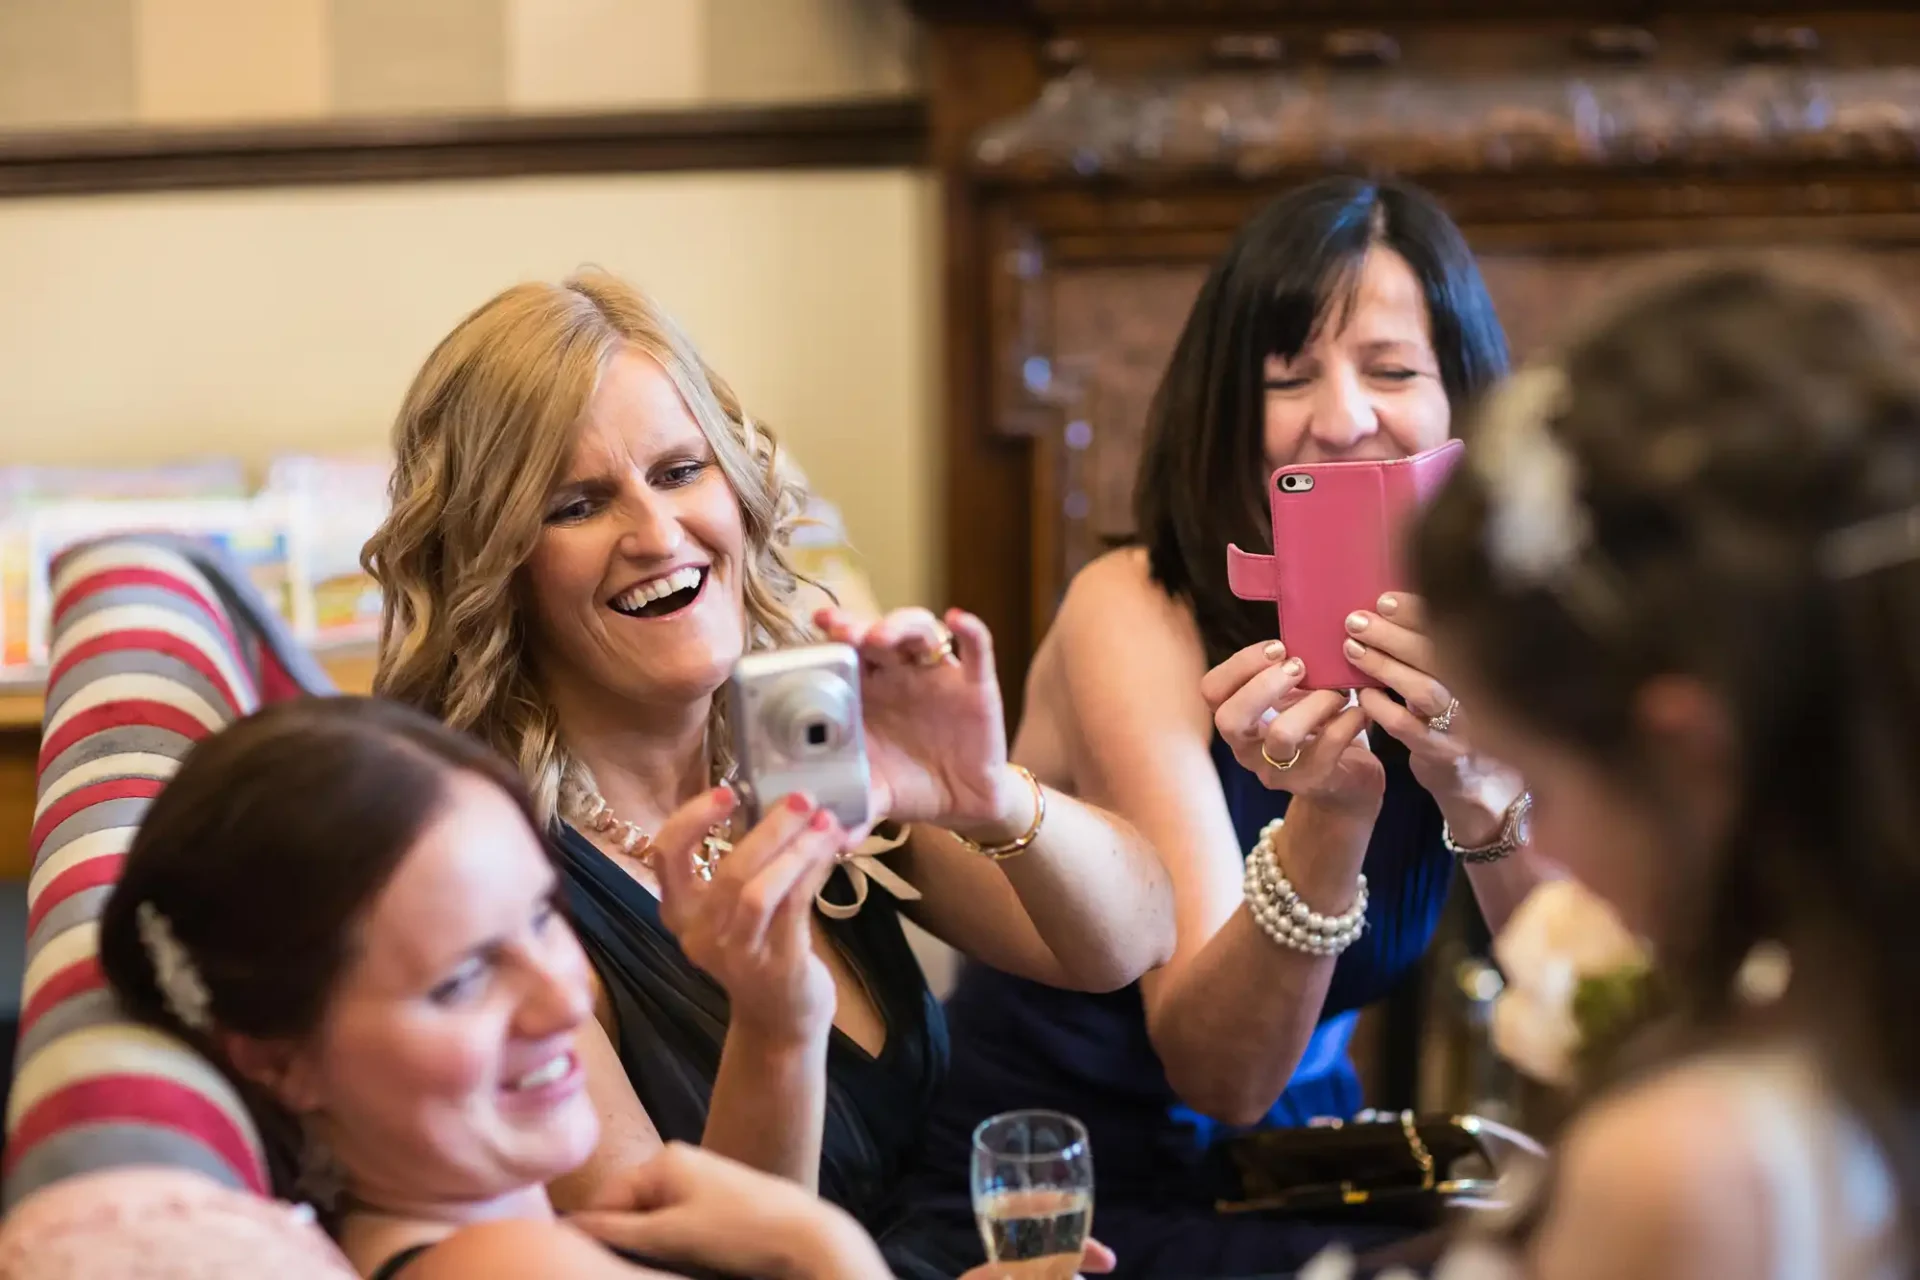 Two women smiling and capturing photos with their phones at a social gathering, surrounded by other guests enjoying the event.